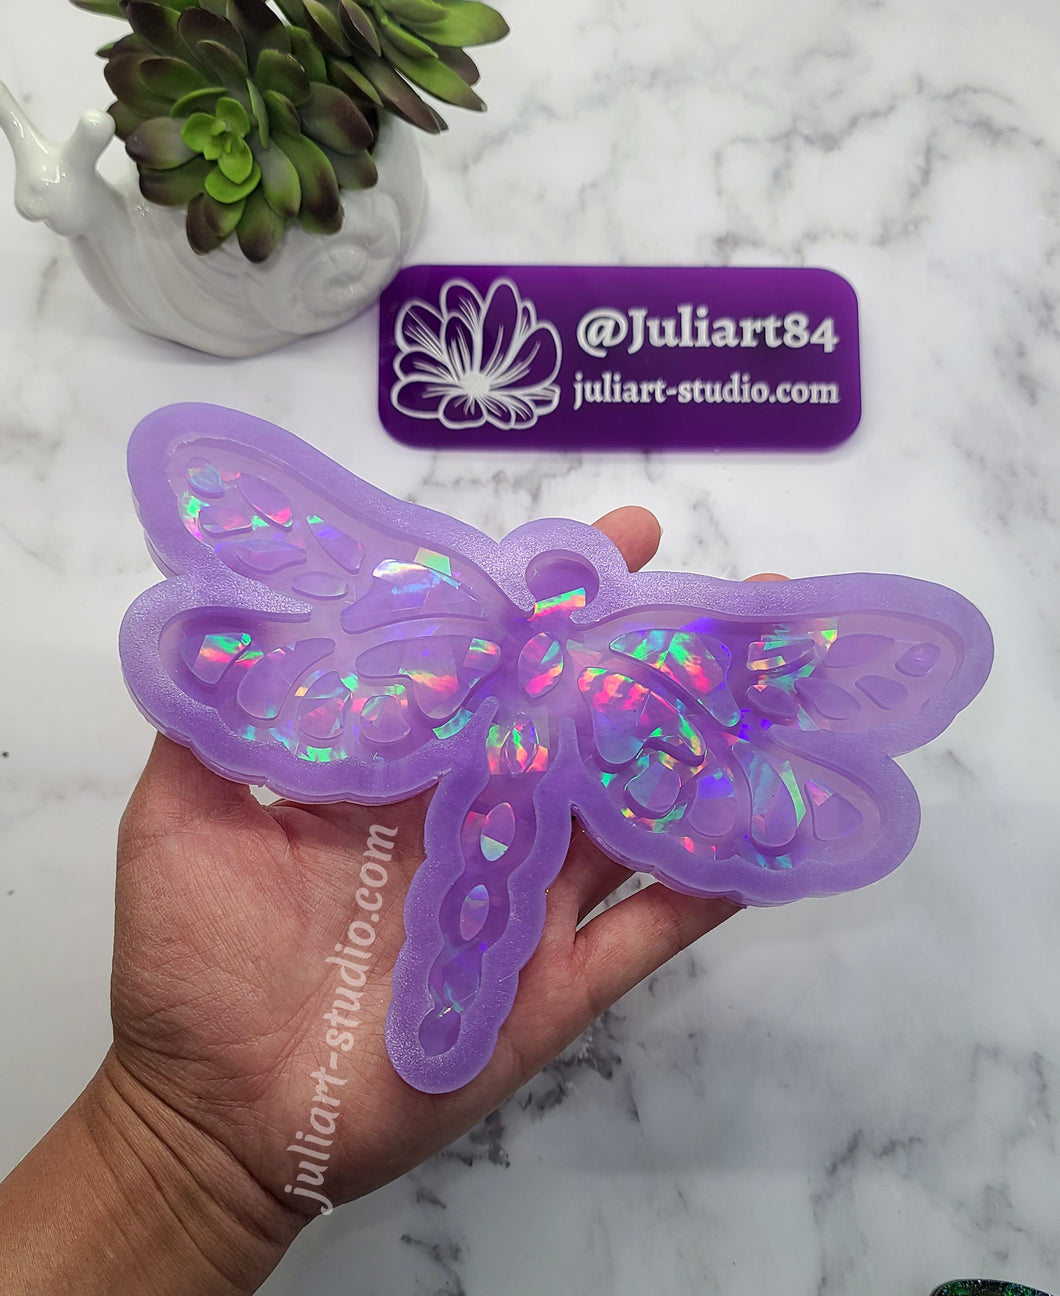 6.75 inch HOLO LARGE Dragonfly Silicone Mold for Resin